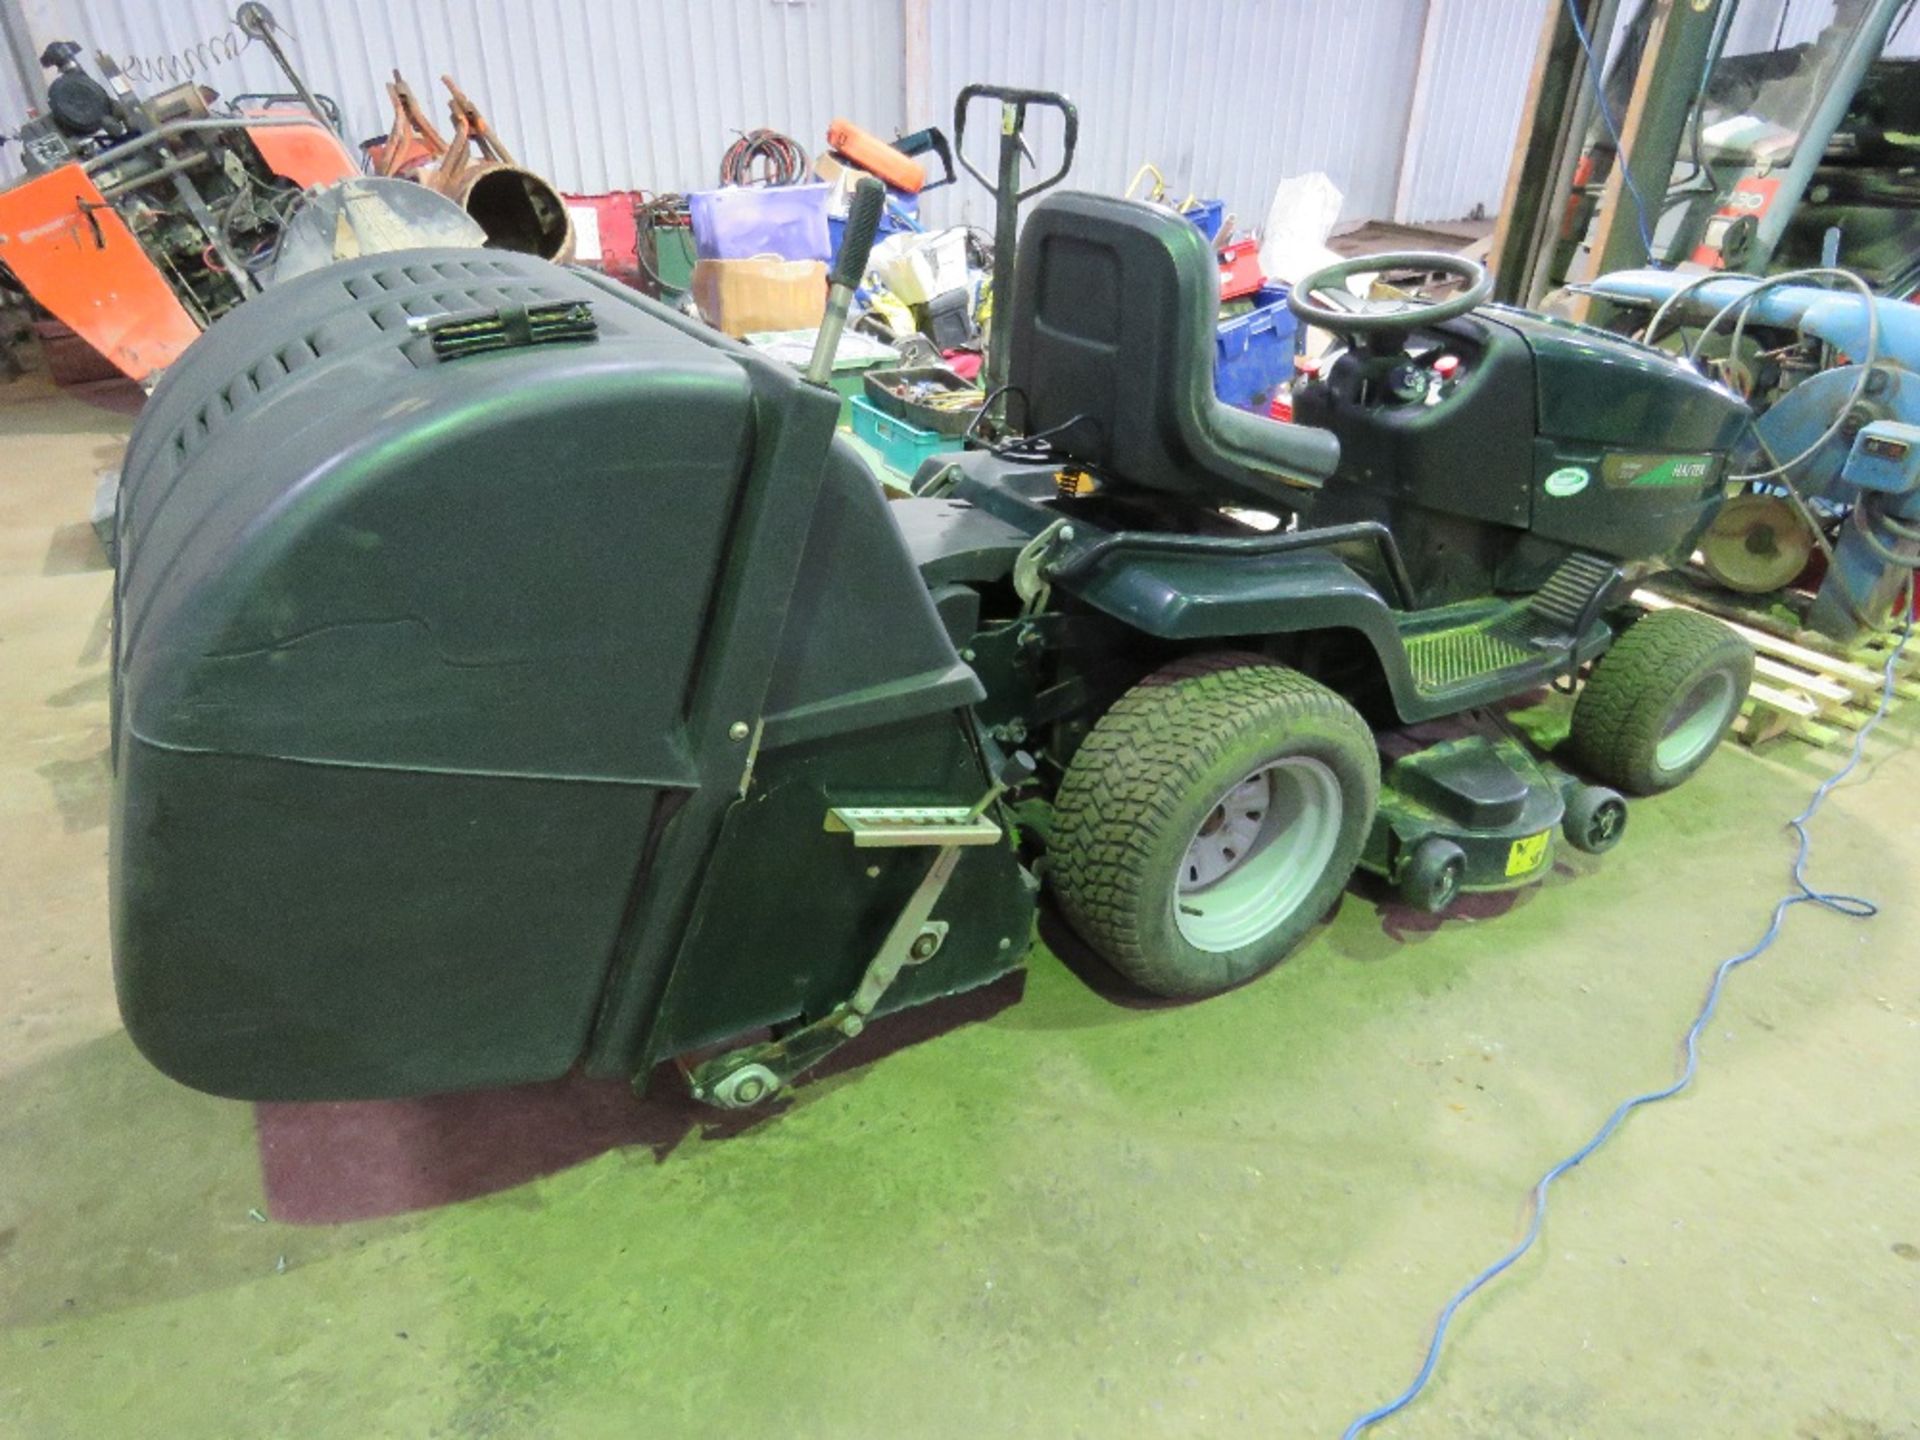 HAYTER ST42 RIDE ON LAWNMOWER WITH POWER COLLECTOR, HYDRASTATIC DRIVE. WHNE TESTED WAS SEEN TO START - Image 2 of 7